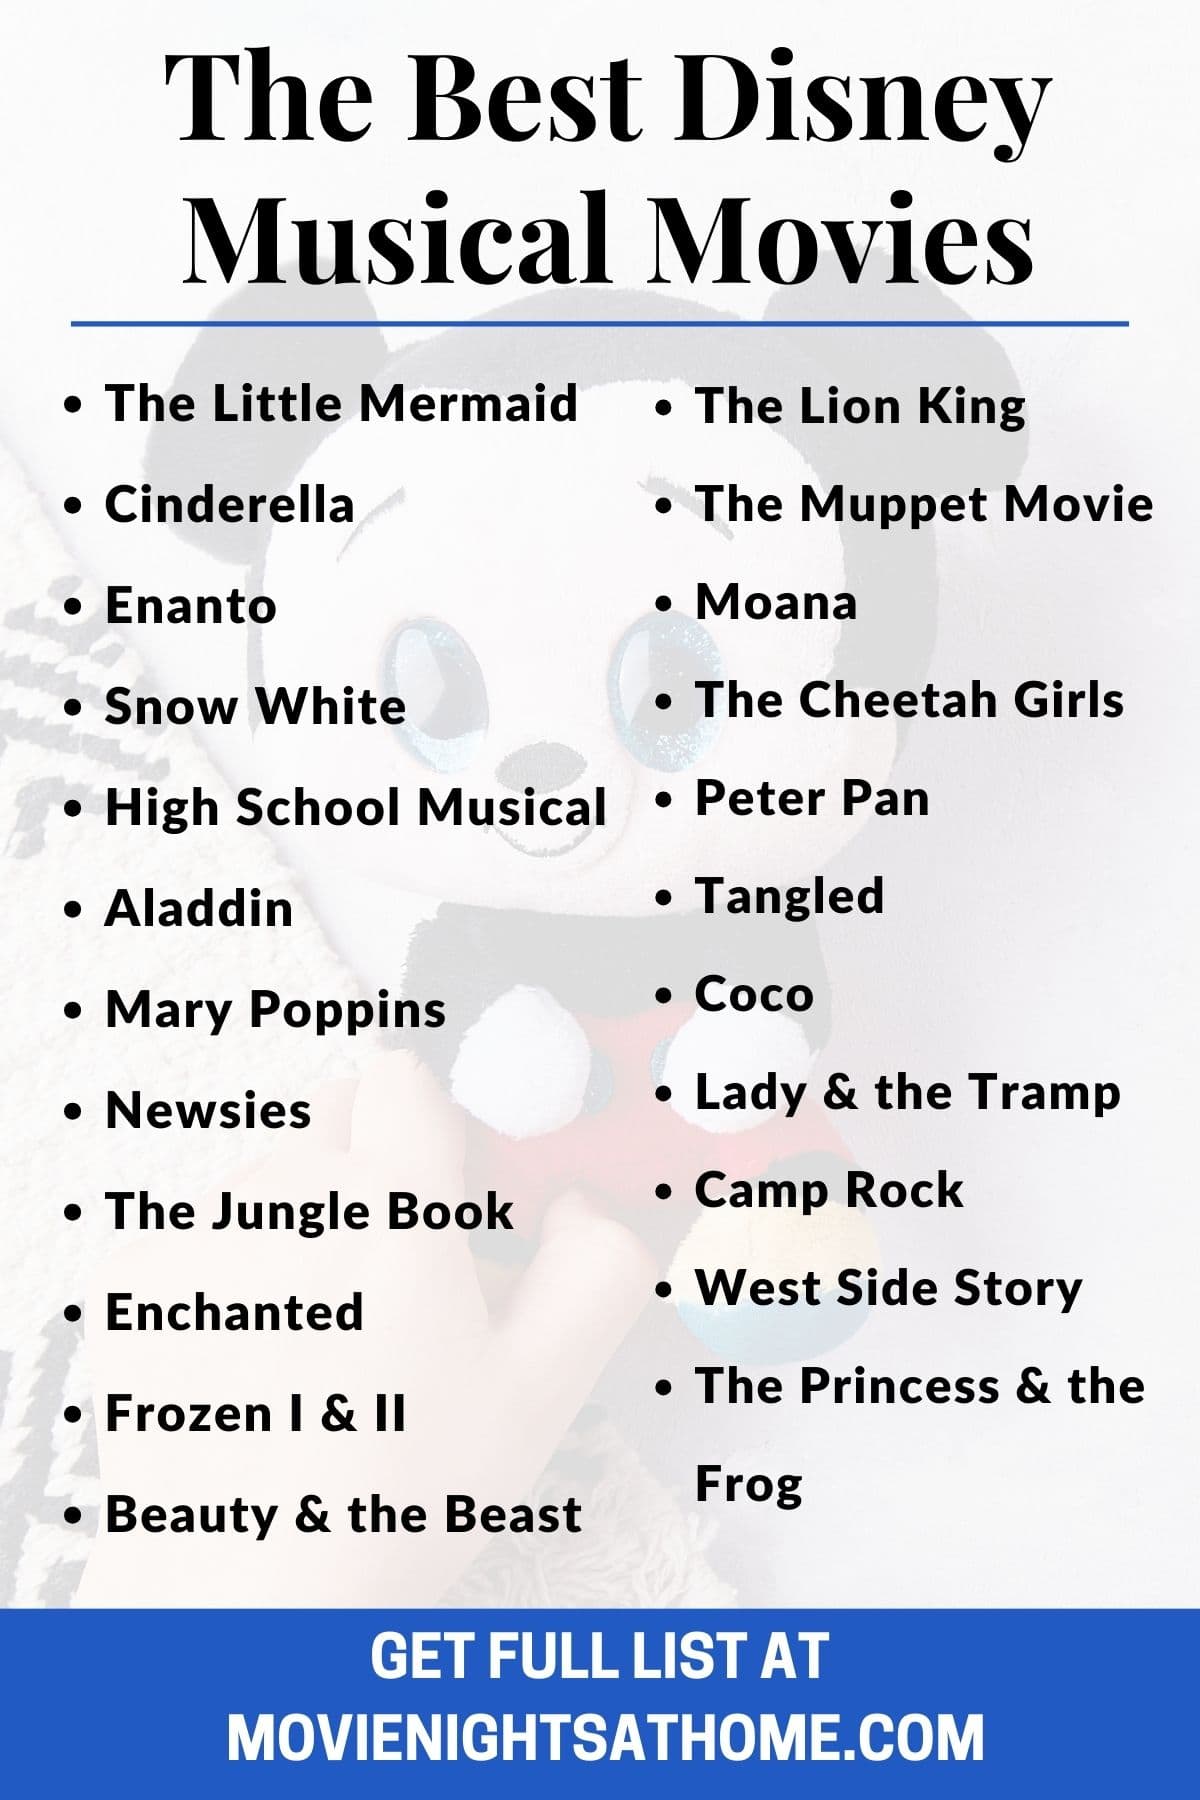 infographic with several Disney musical movies listed